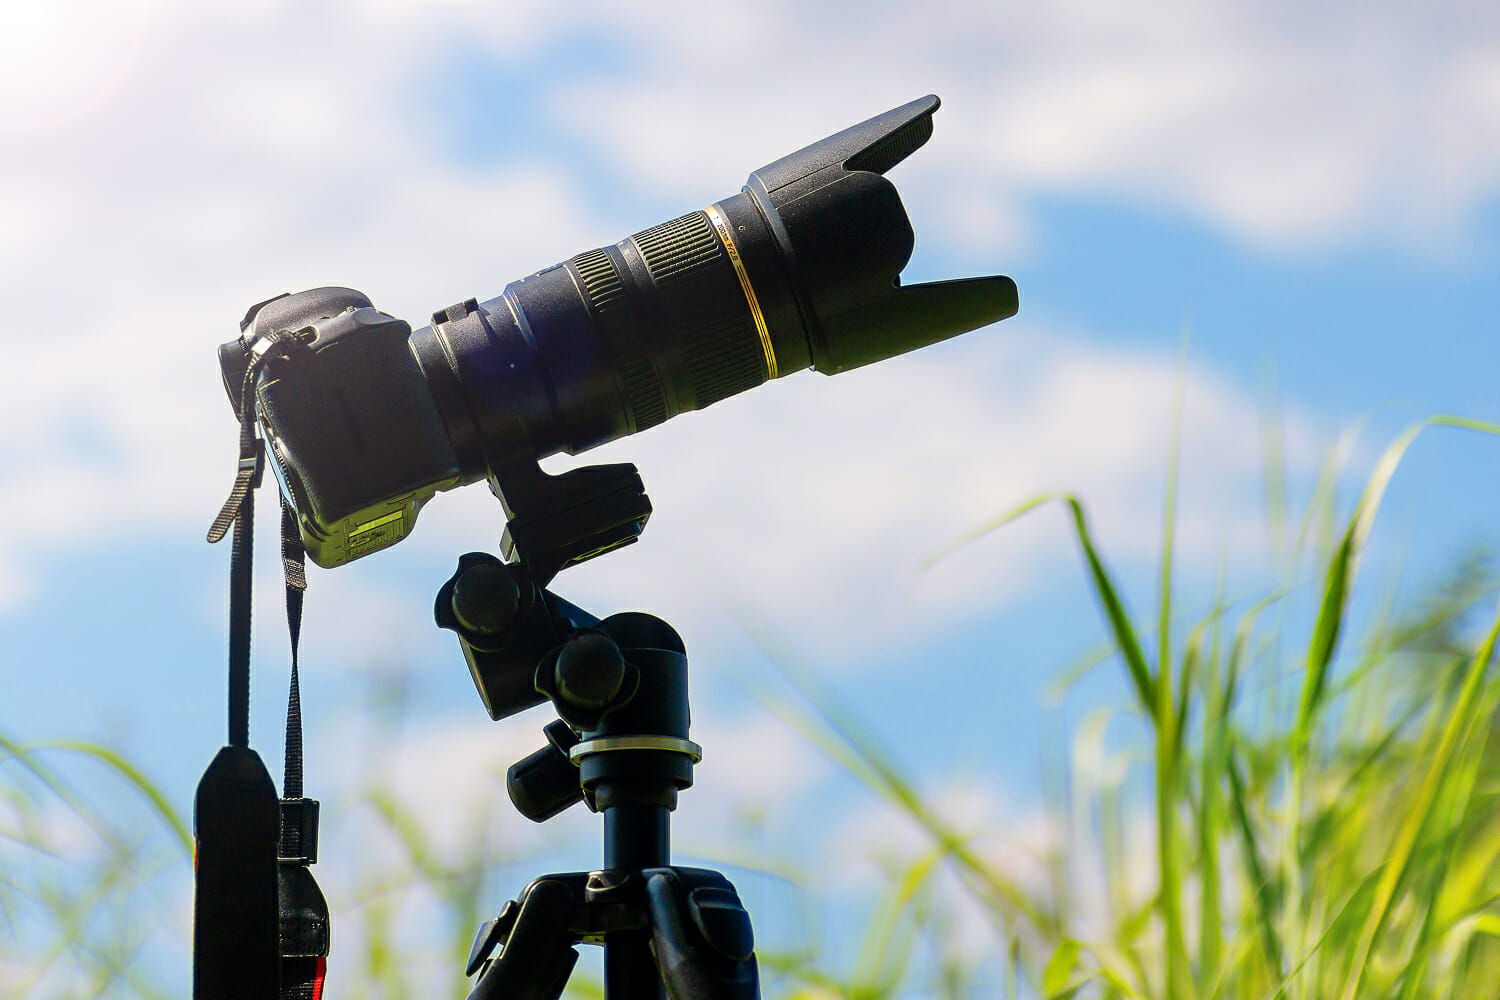 Dslr camera with a telephoto lens mounted on a tripod outdoors under a sunny sky.